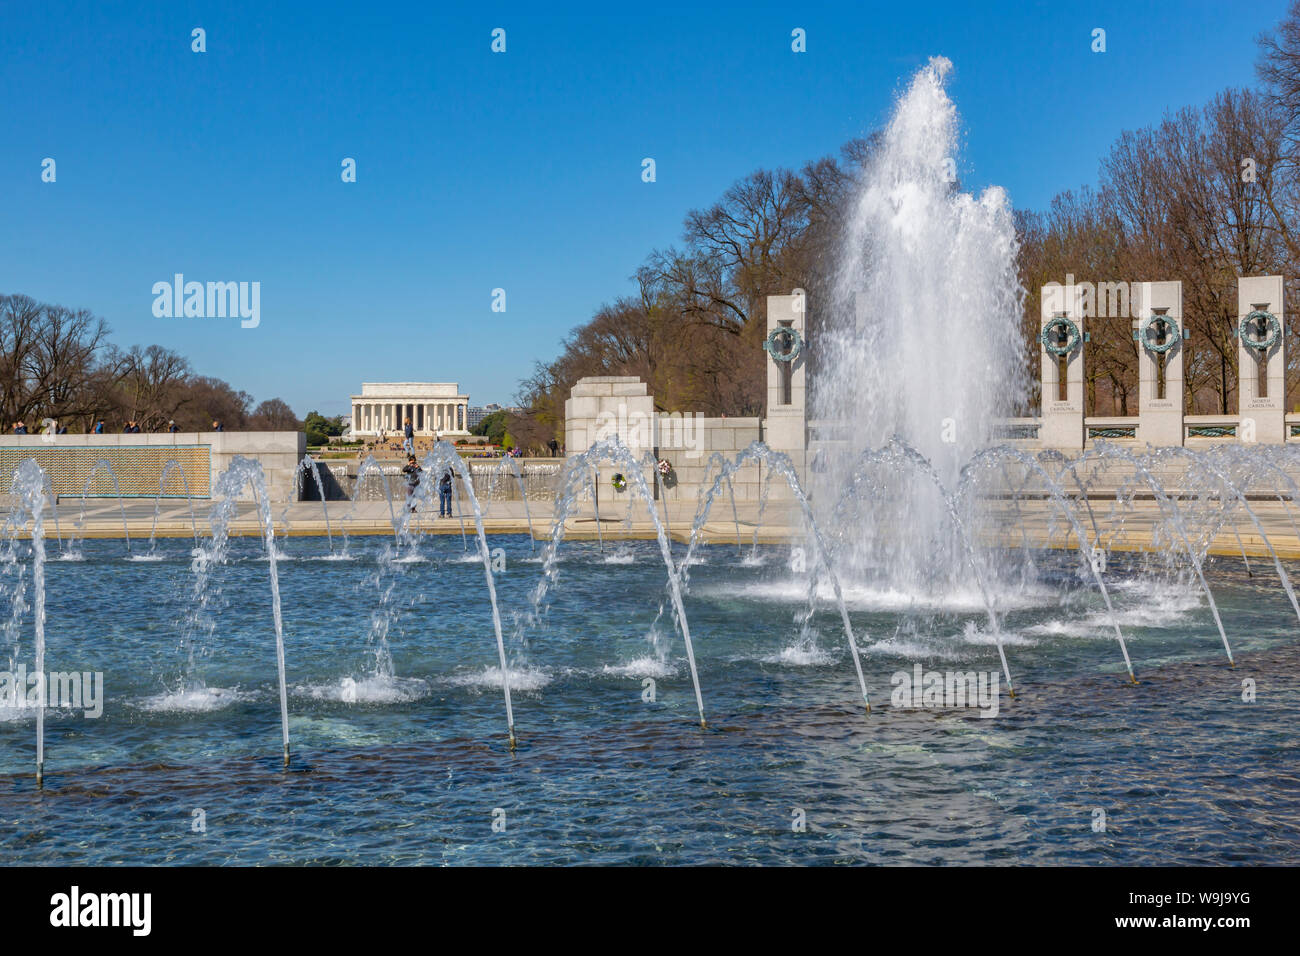 View of World War Two Memorial detail and Lincoln Memorial visible in background, Washington D.C., United States of America, North America Stock Photo